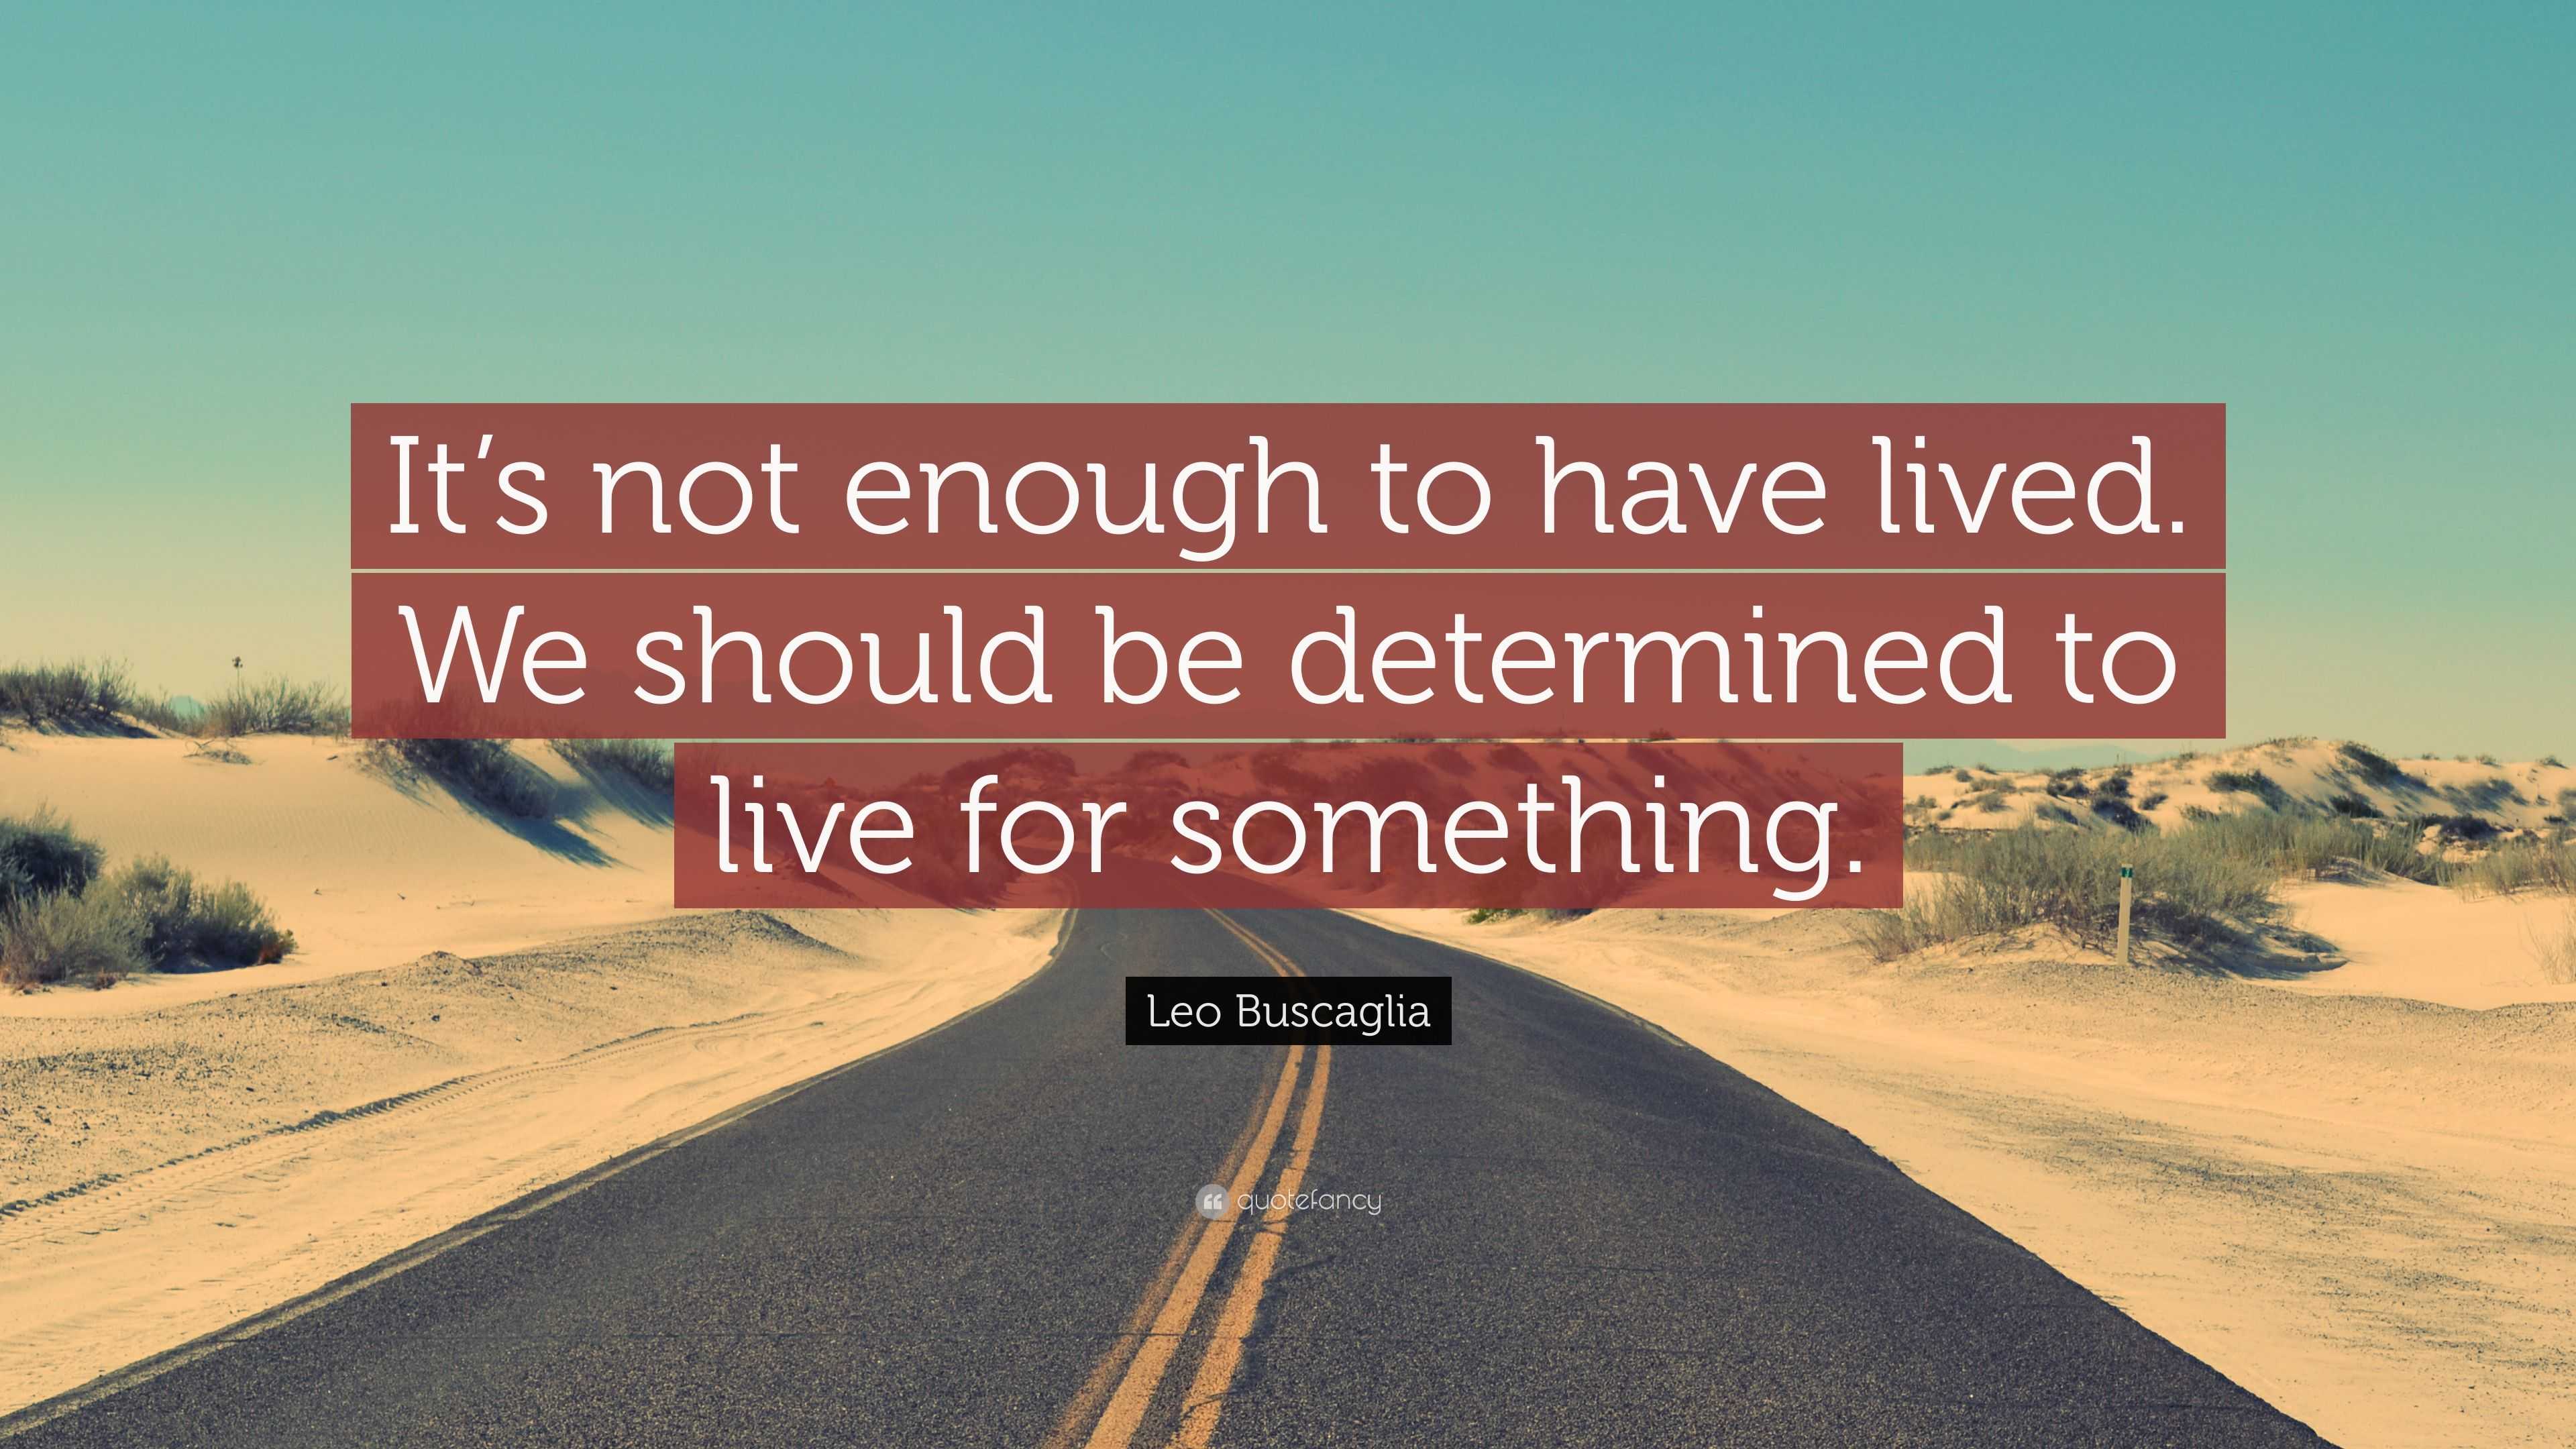 Leo Buscaglia Quote: “It’s not enough to have lived. We should be ...